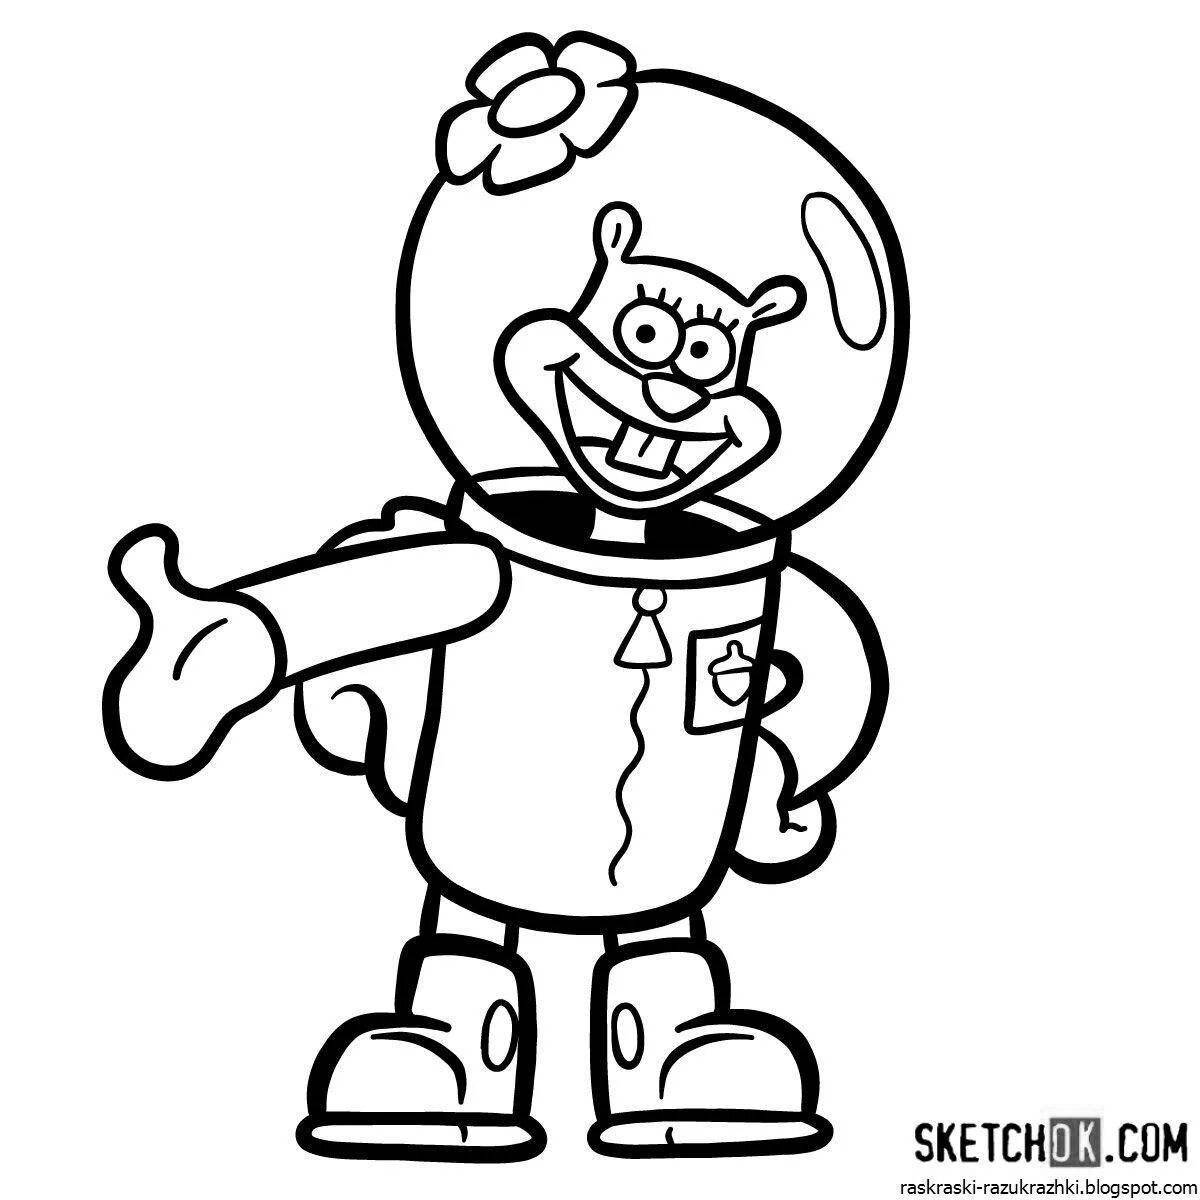 Sandy's playful coloring page